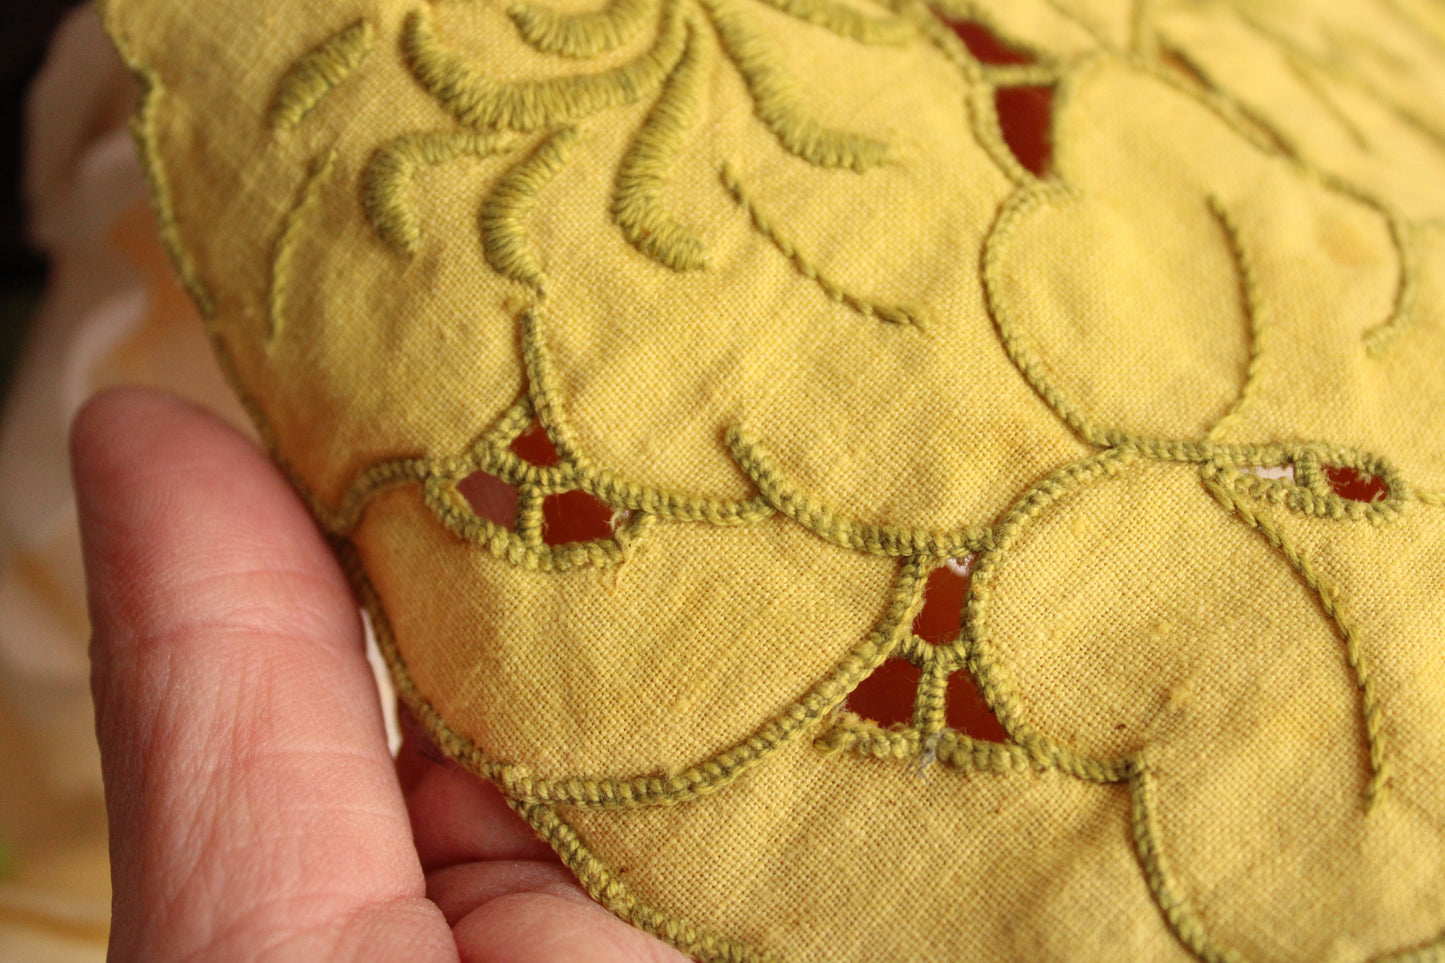 Set of Two Hand Plant Dyed Vintage Doilies in Sunny Yellow